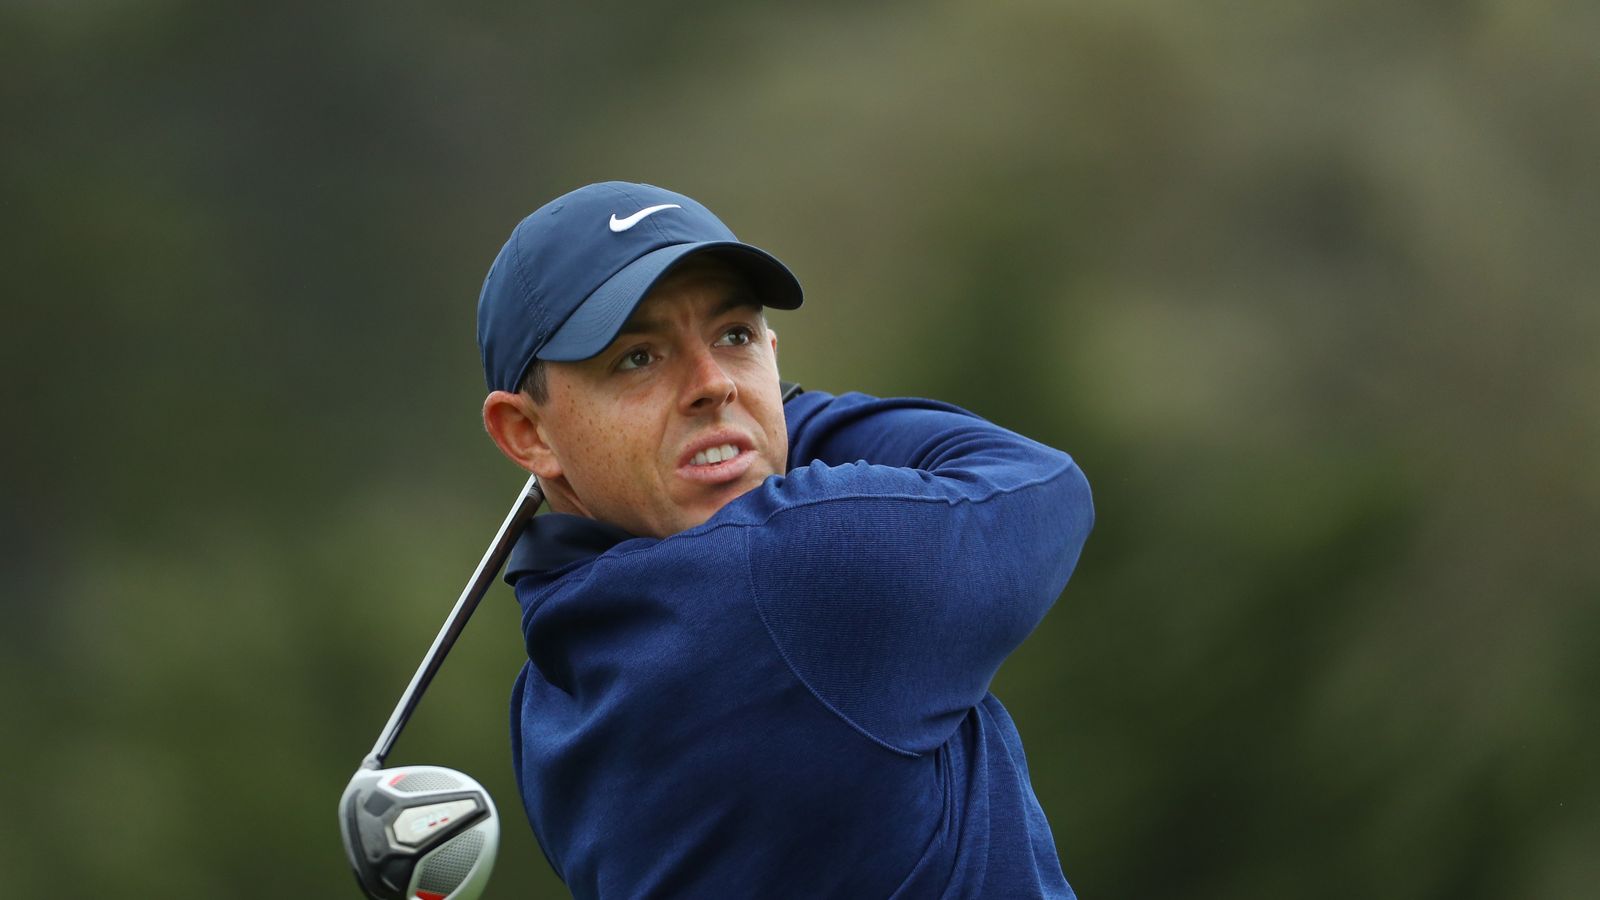 US Open Rory McIlroy feels he has a great chance of victory at Pebble